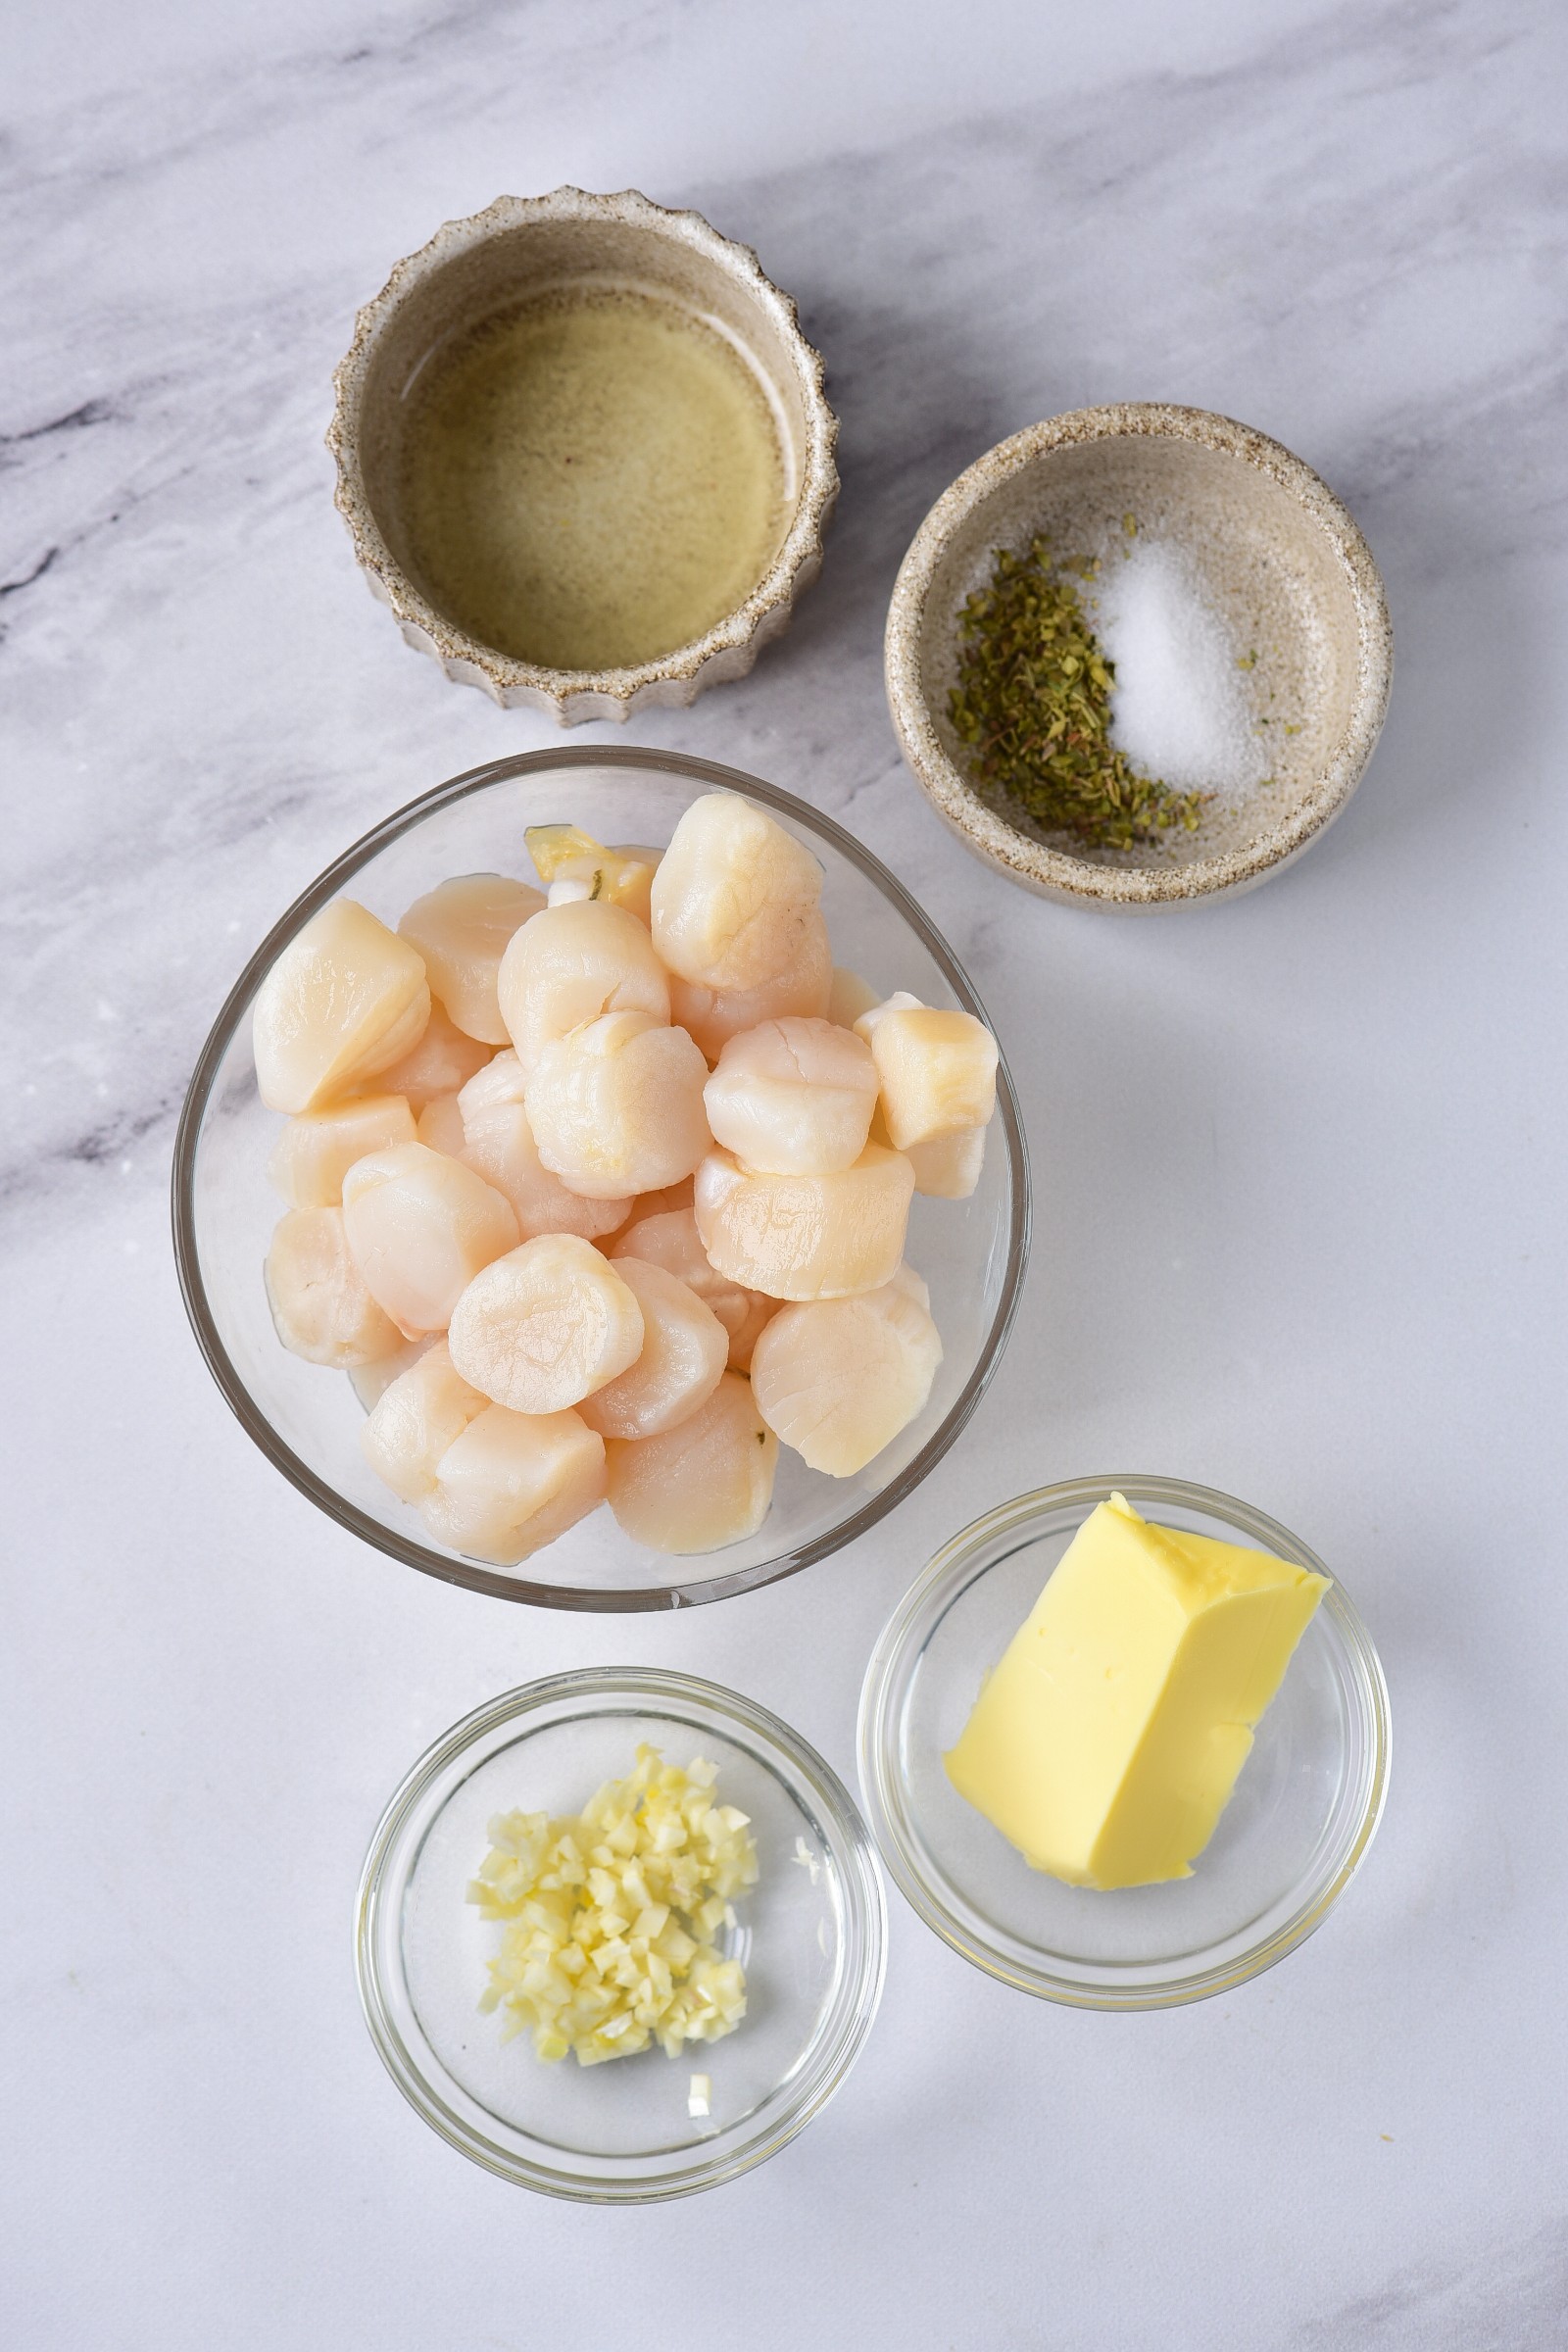 The ingredients to make air fryer scallops in bowls.